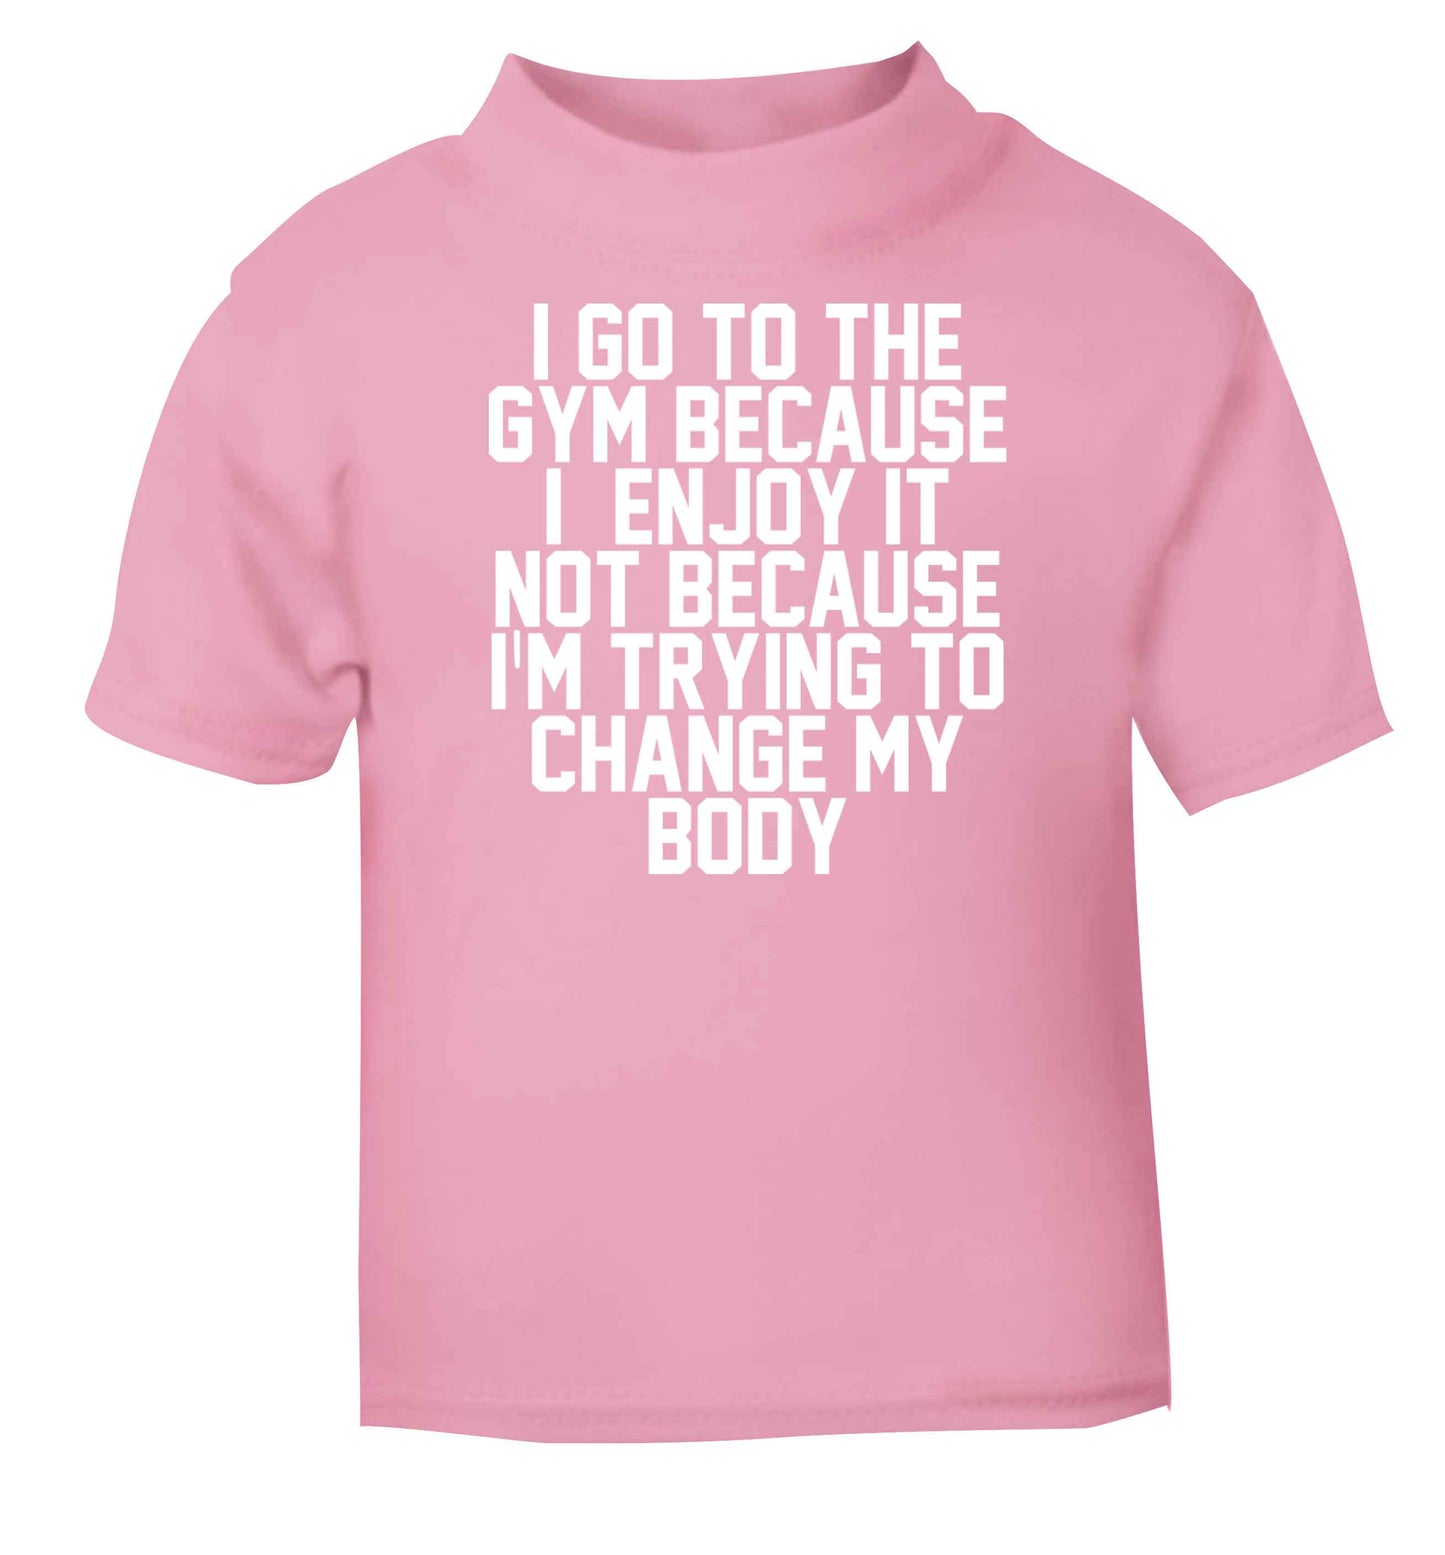 I go to the gym because I enjoy it not because I'm trying to change my body light pink baby toddler Tshirt 2 Years